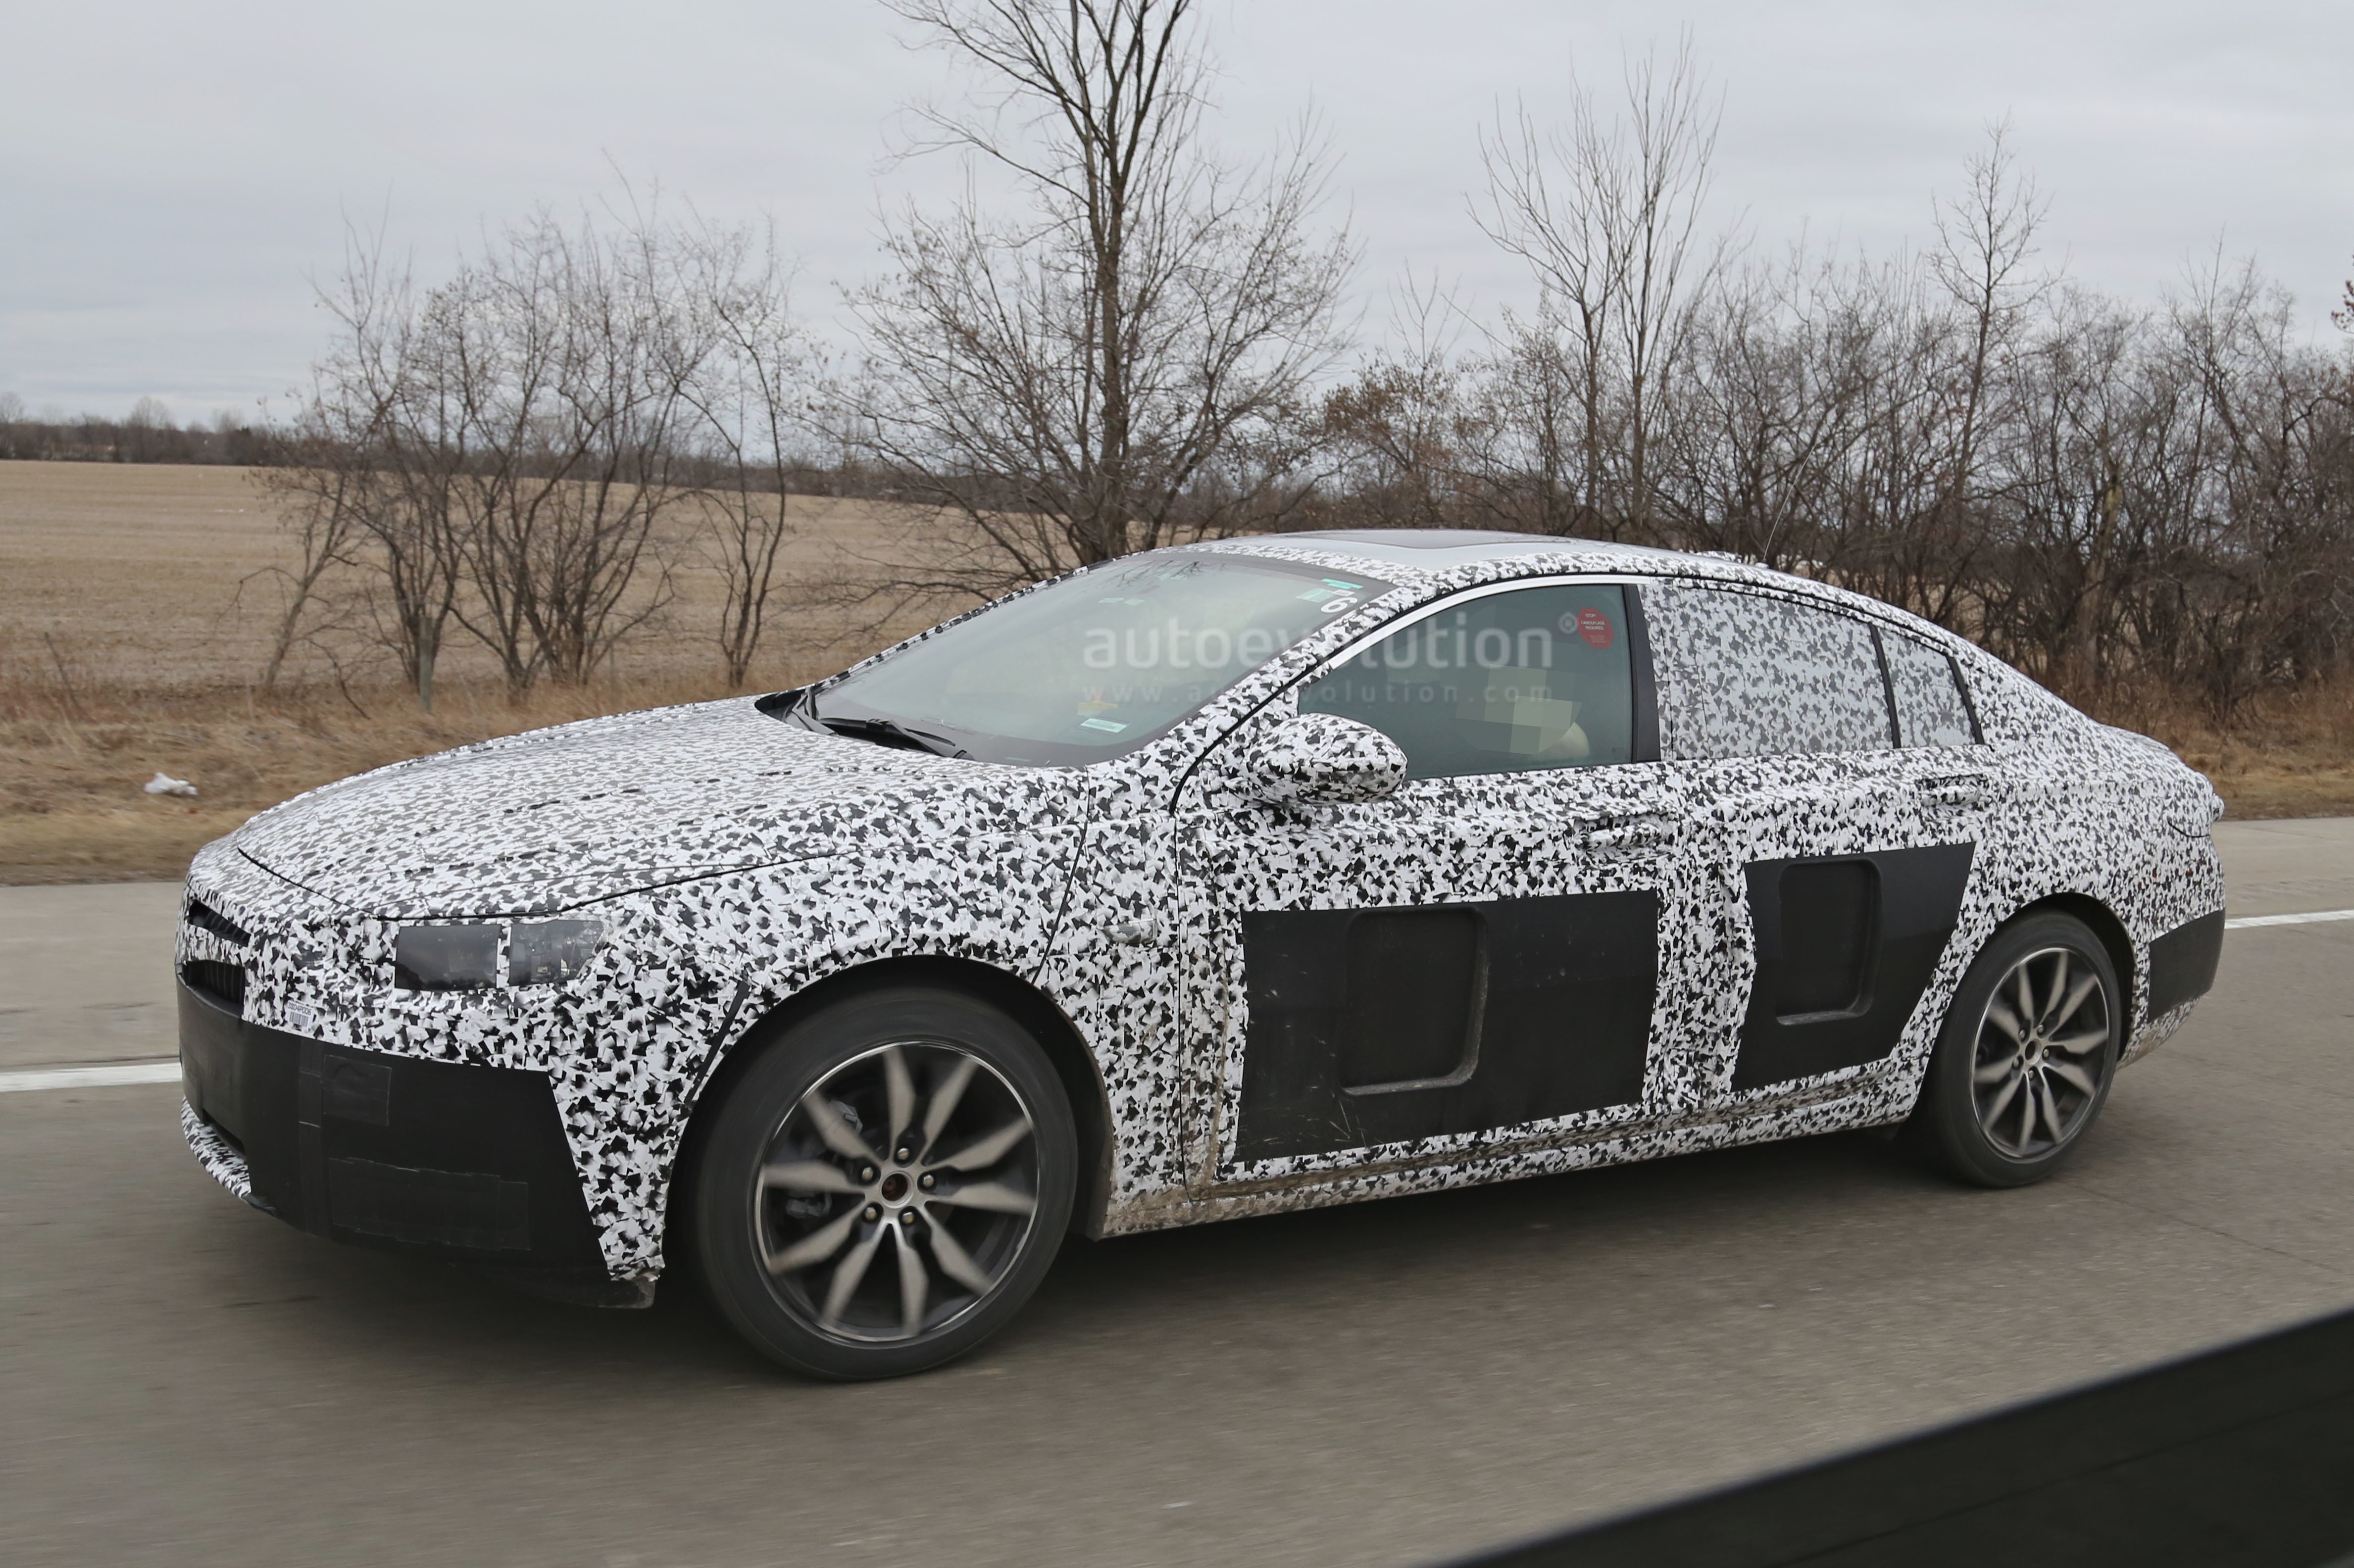 2018 Buick Regal Spied for the First Time - autoevolution